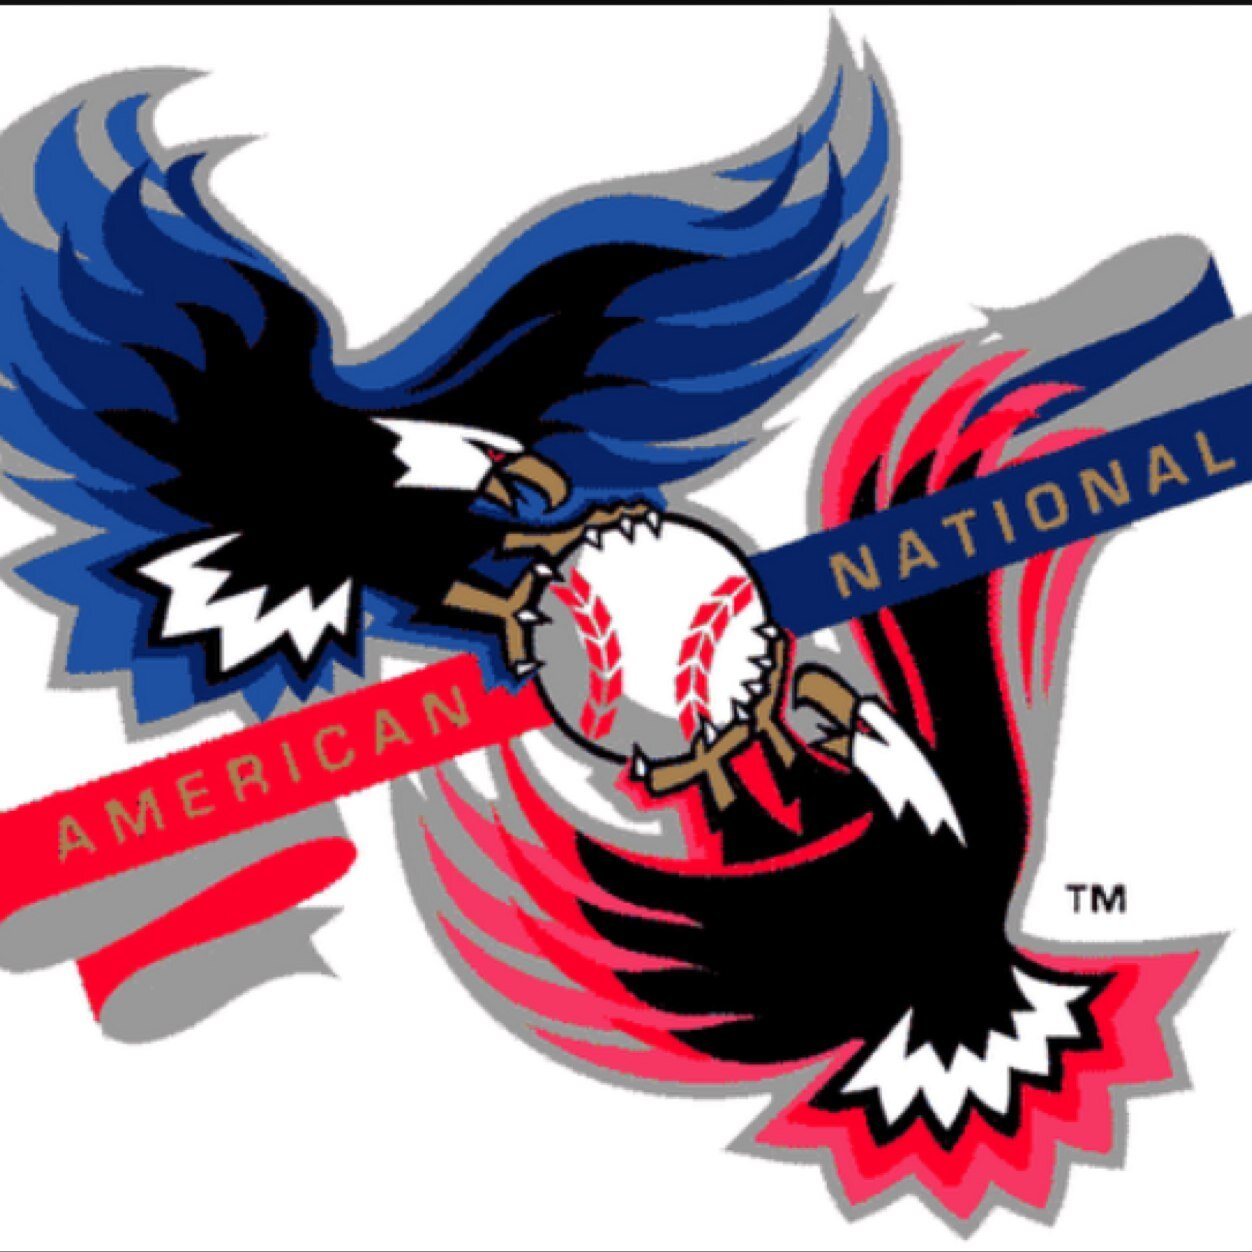 Daily American and National League Standings + Updates From Around the League!